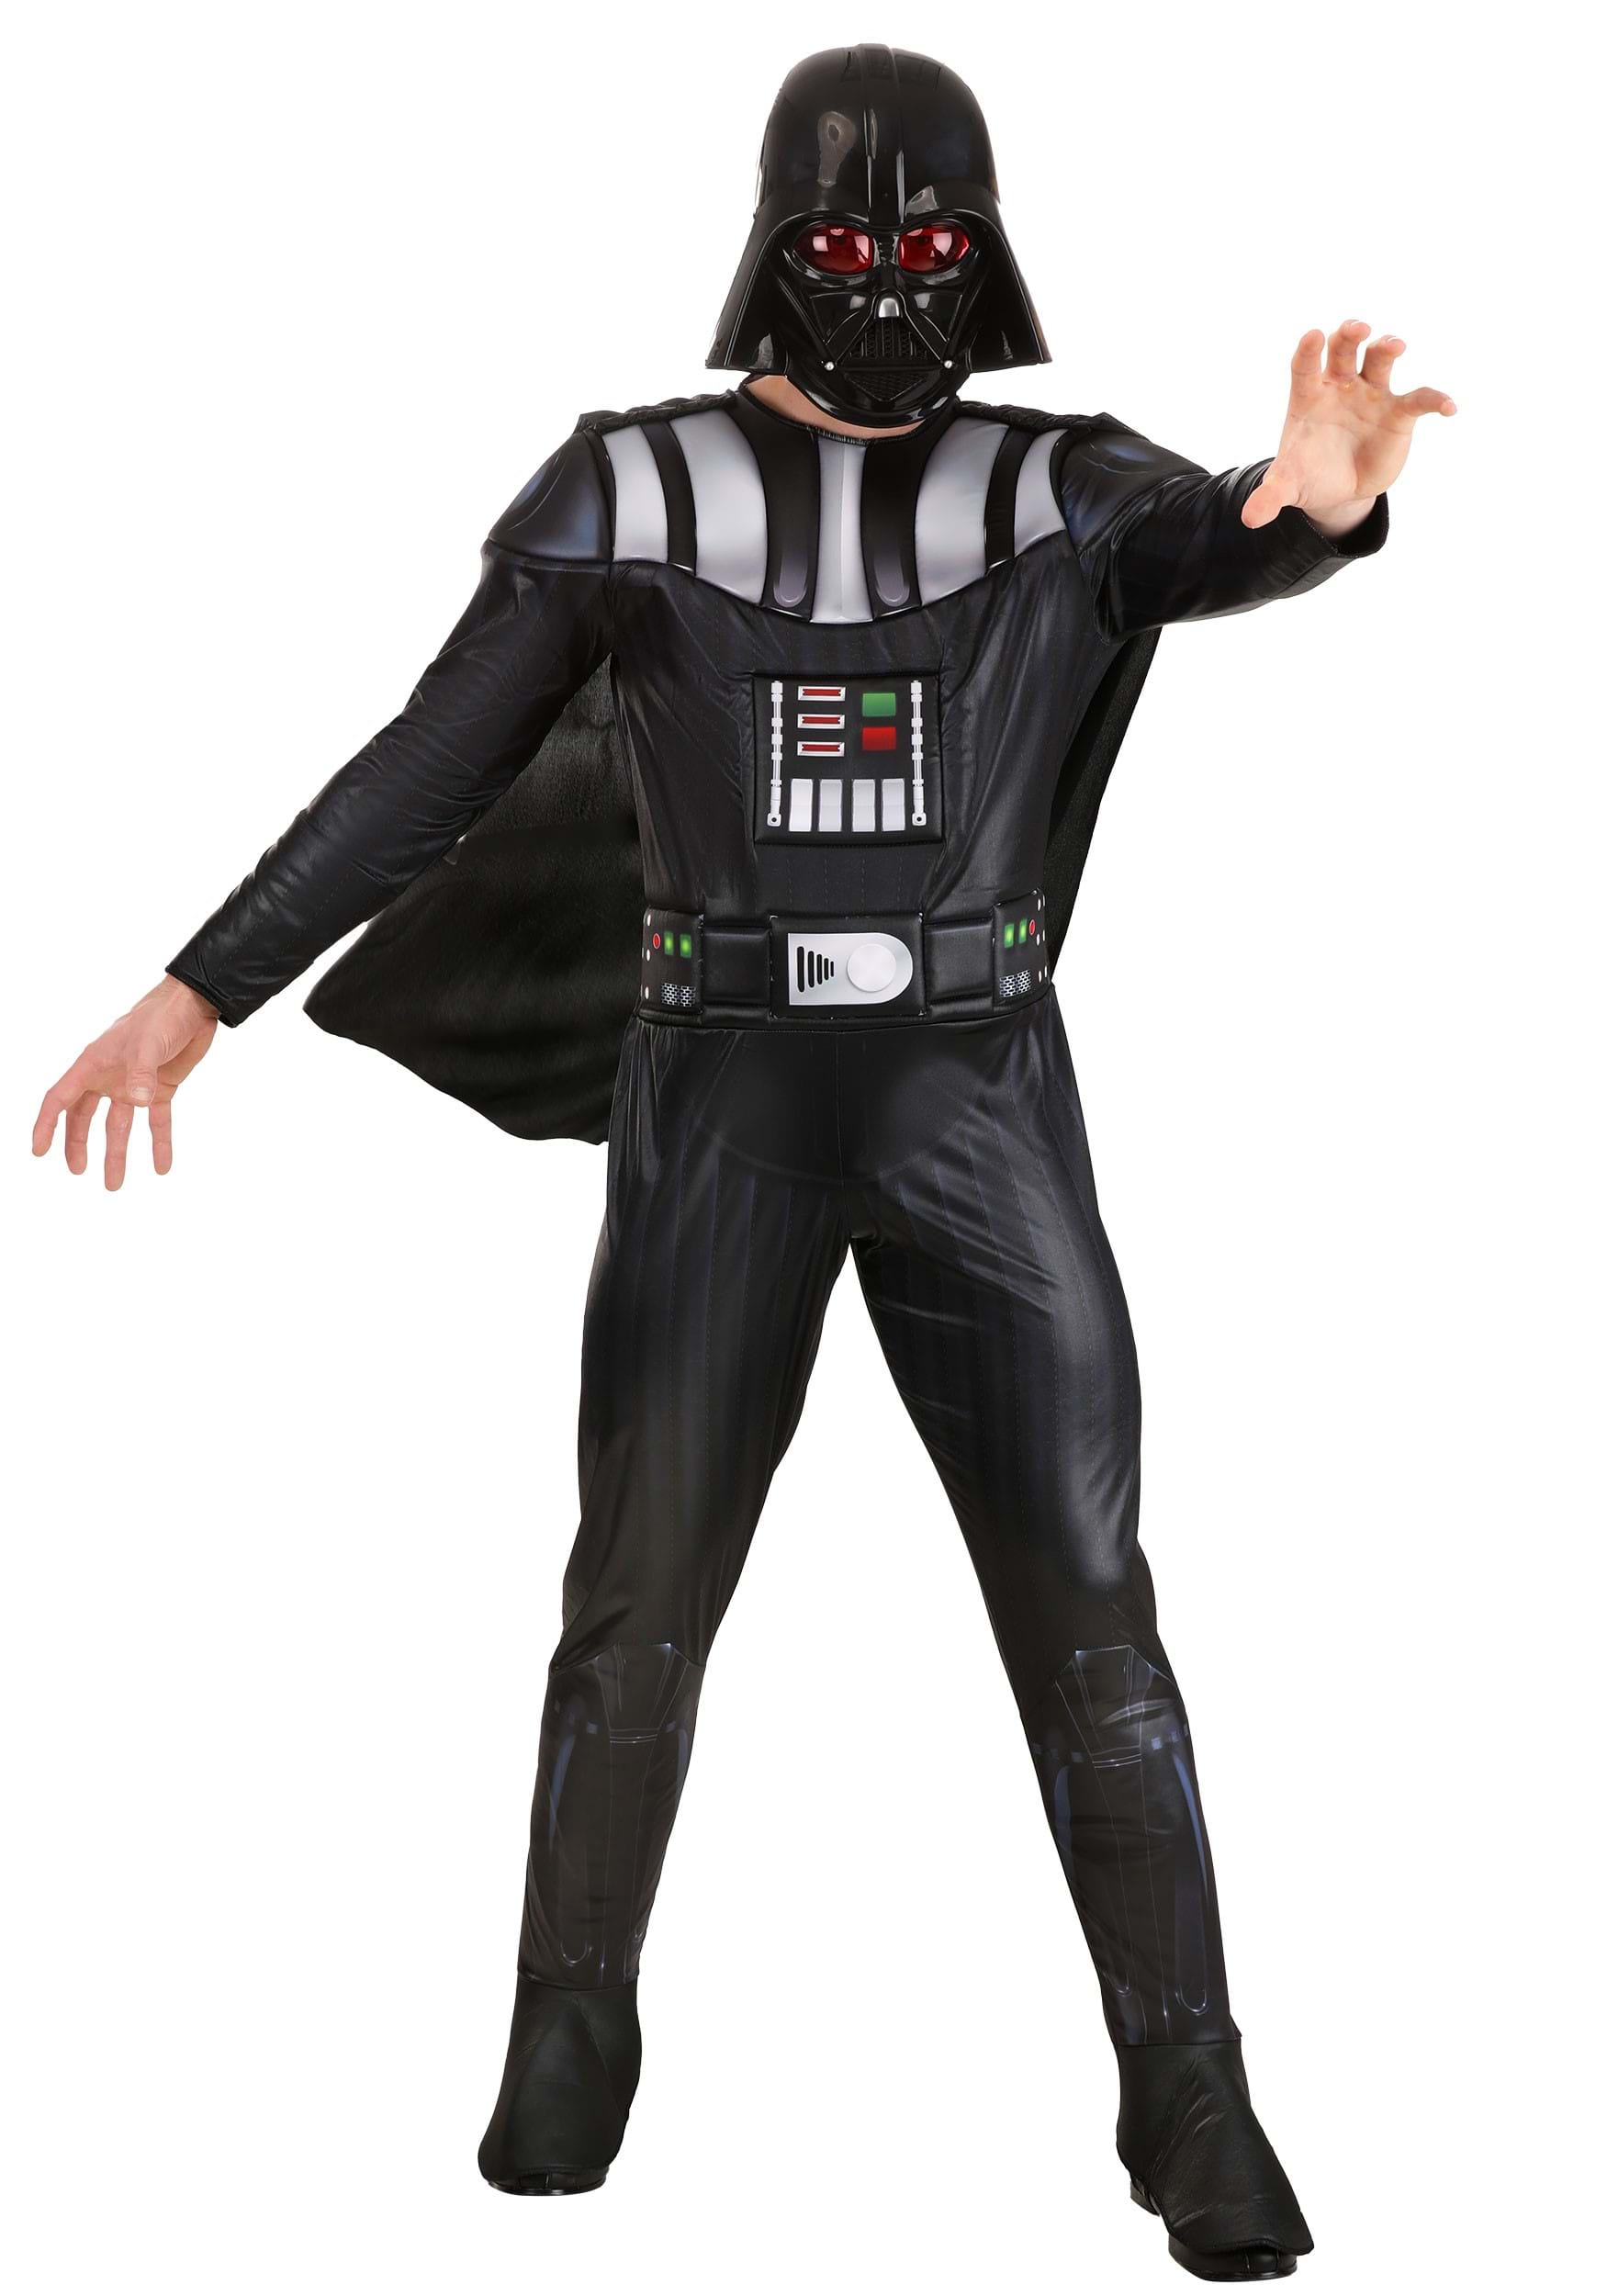 Image of Jazwares Darth Vader Costume for Adults